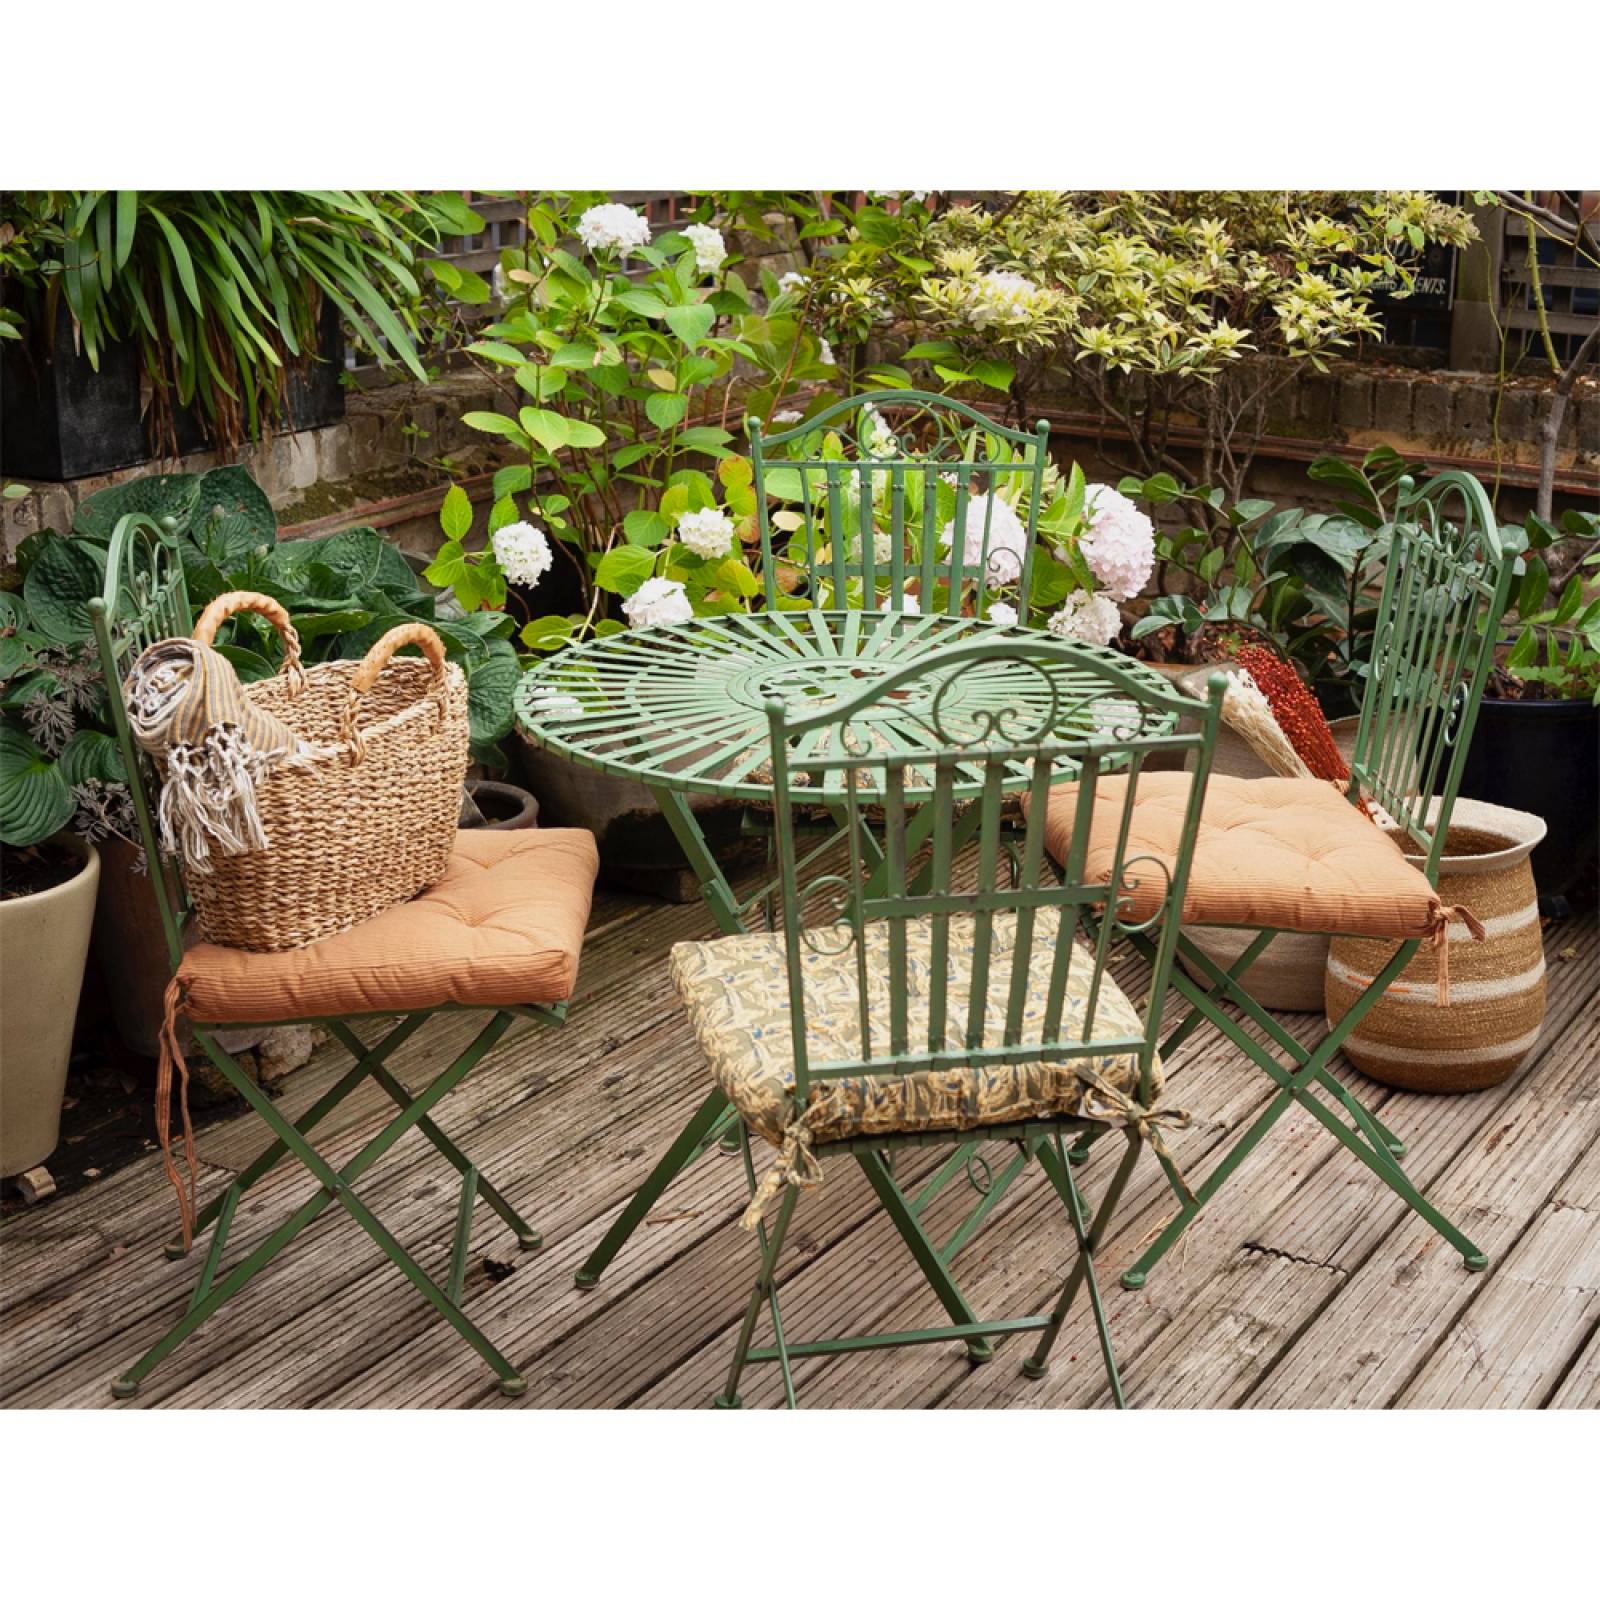 Set Of Metal Garden Table & 2 Chairs In Antique Green thumbnails